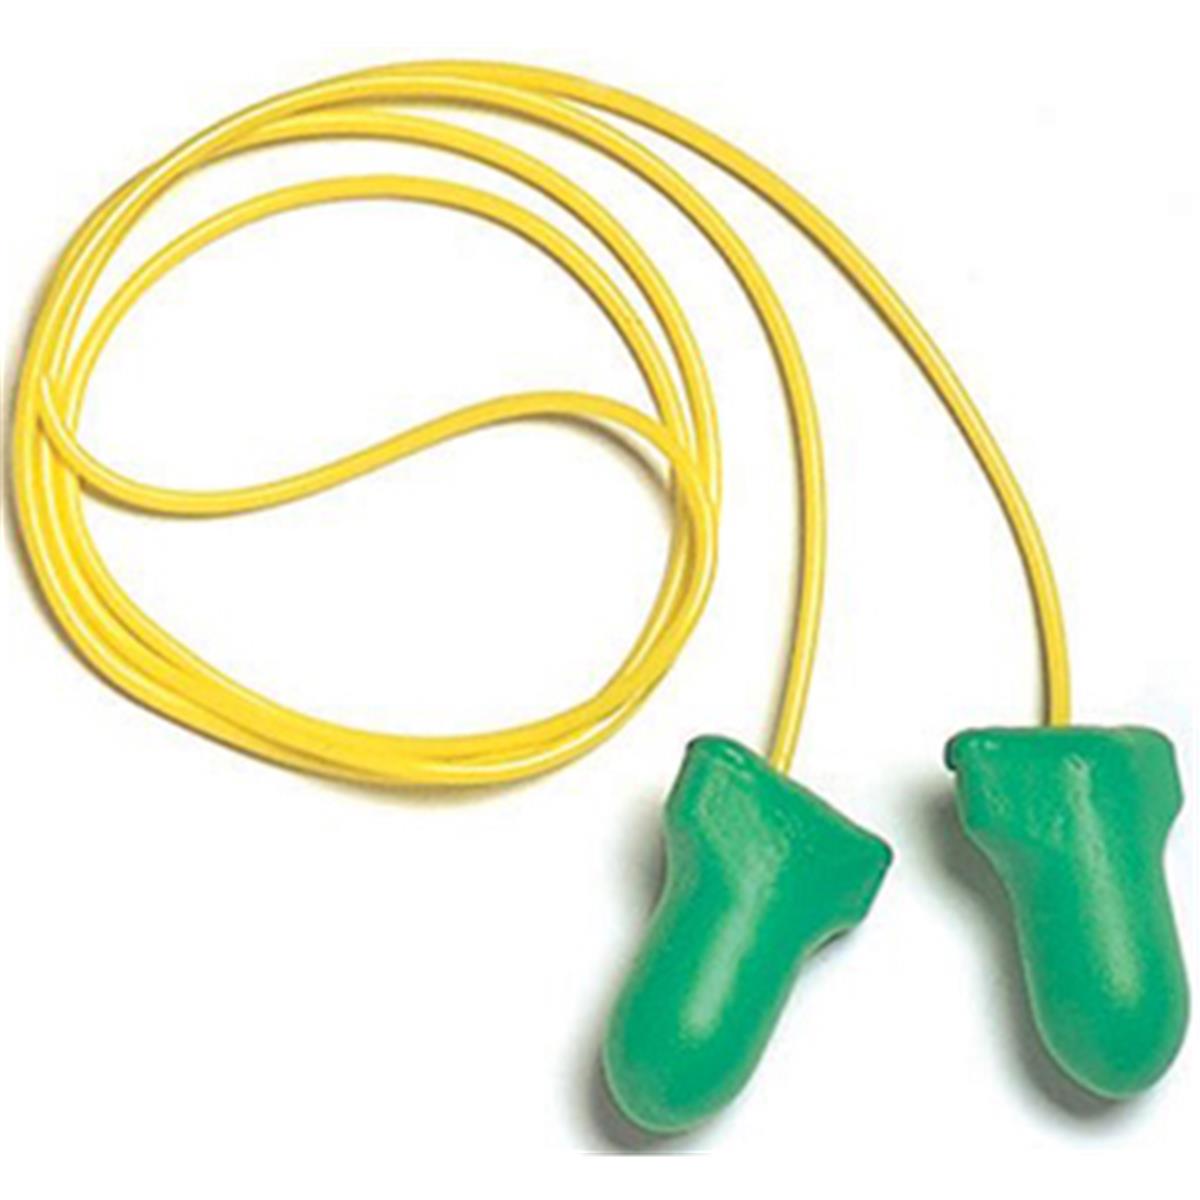 Howard Leight Max-lite 30db Ear Plugs - Pack Of 200